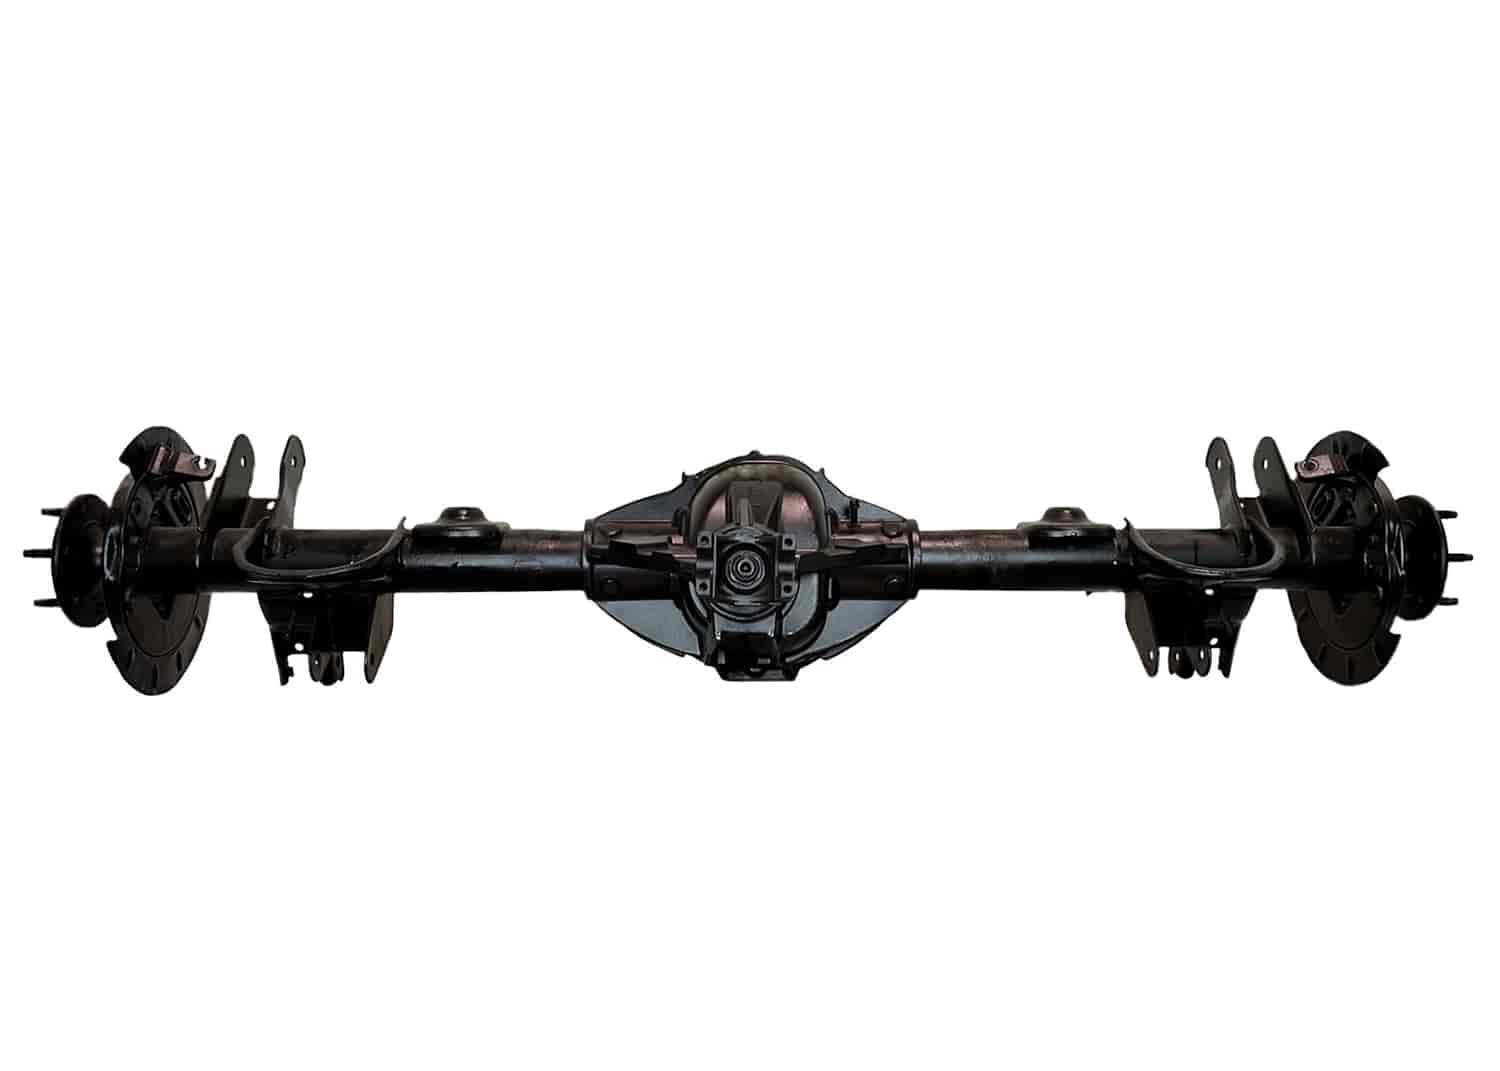 Remanufactured Rear Axle Assembly for 2002-2005 Chevy/GMC/Isuzu SUV